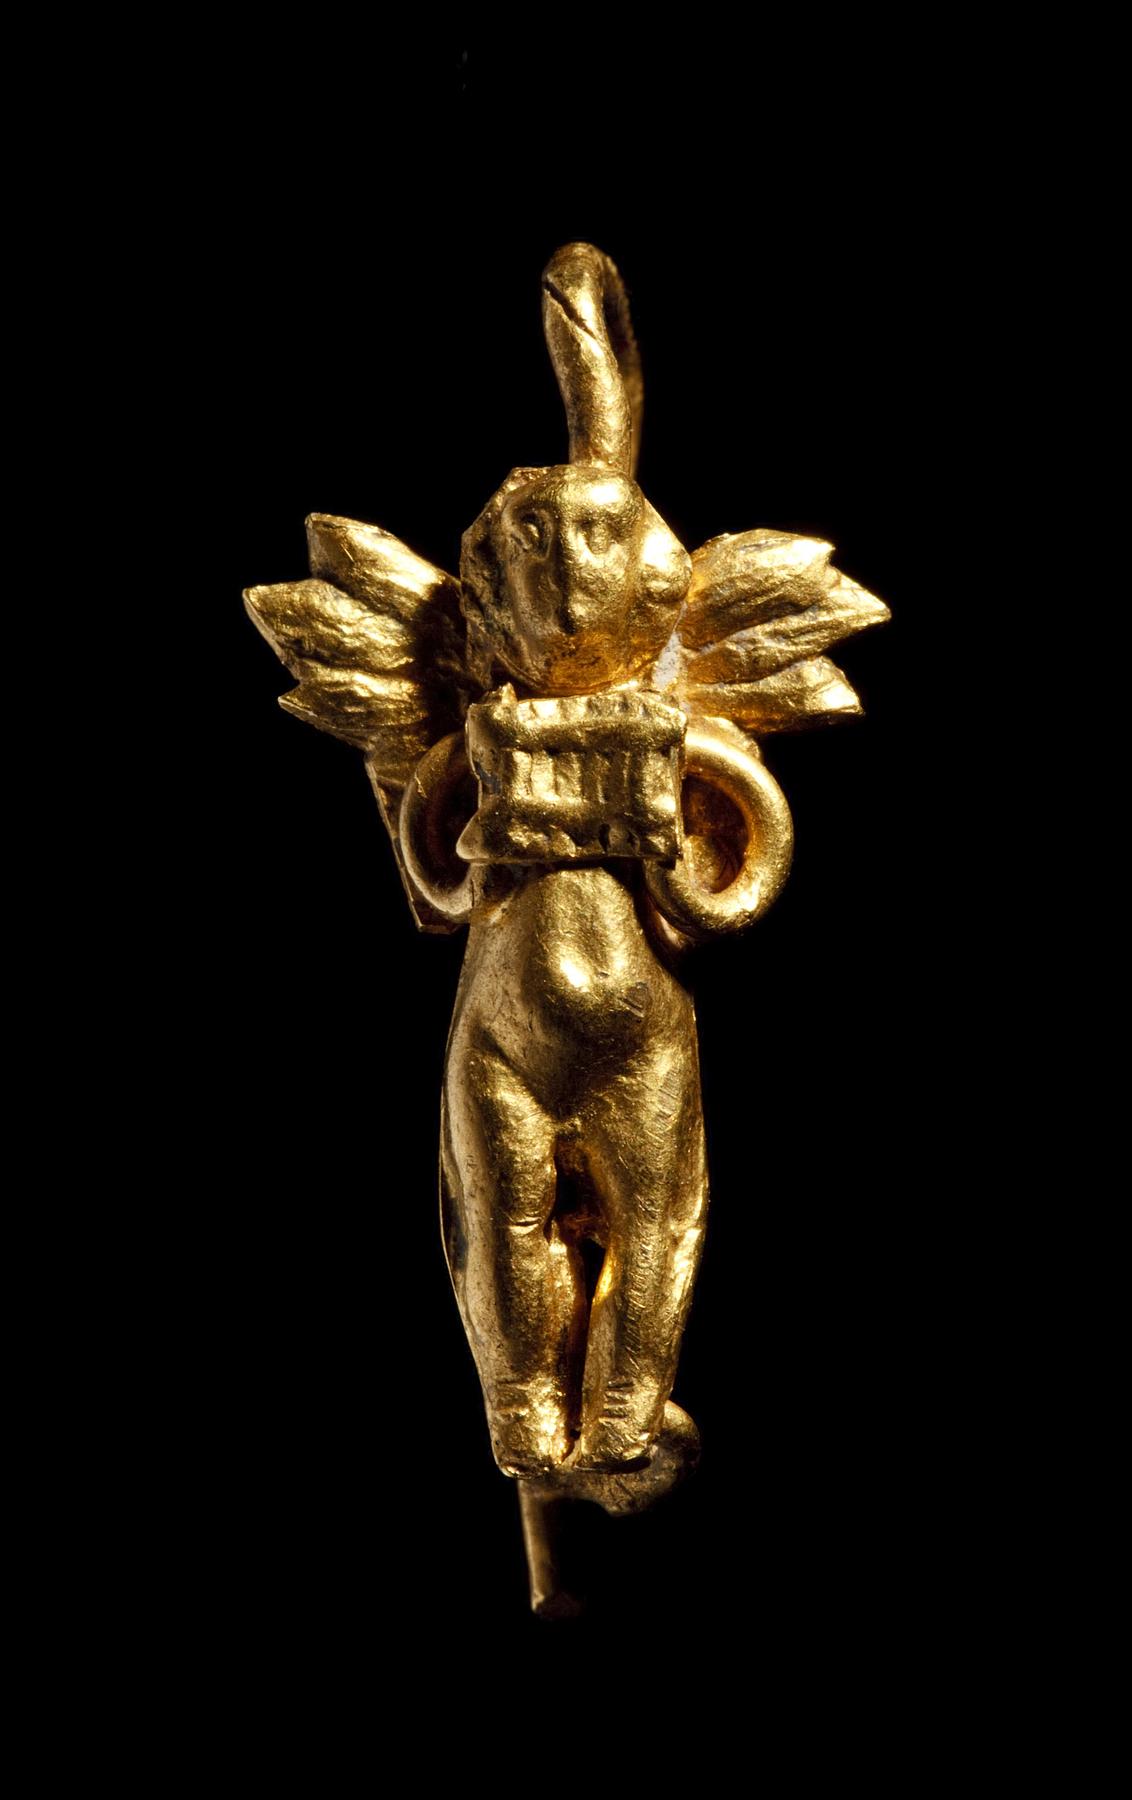 Ear ring in the shape of Cupid, H1832